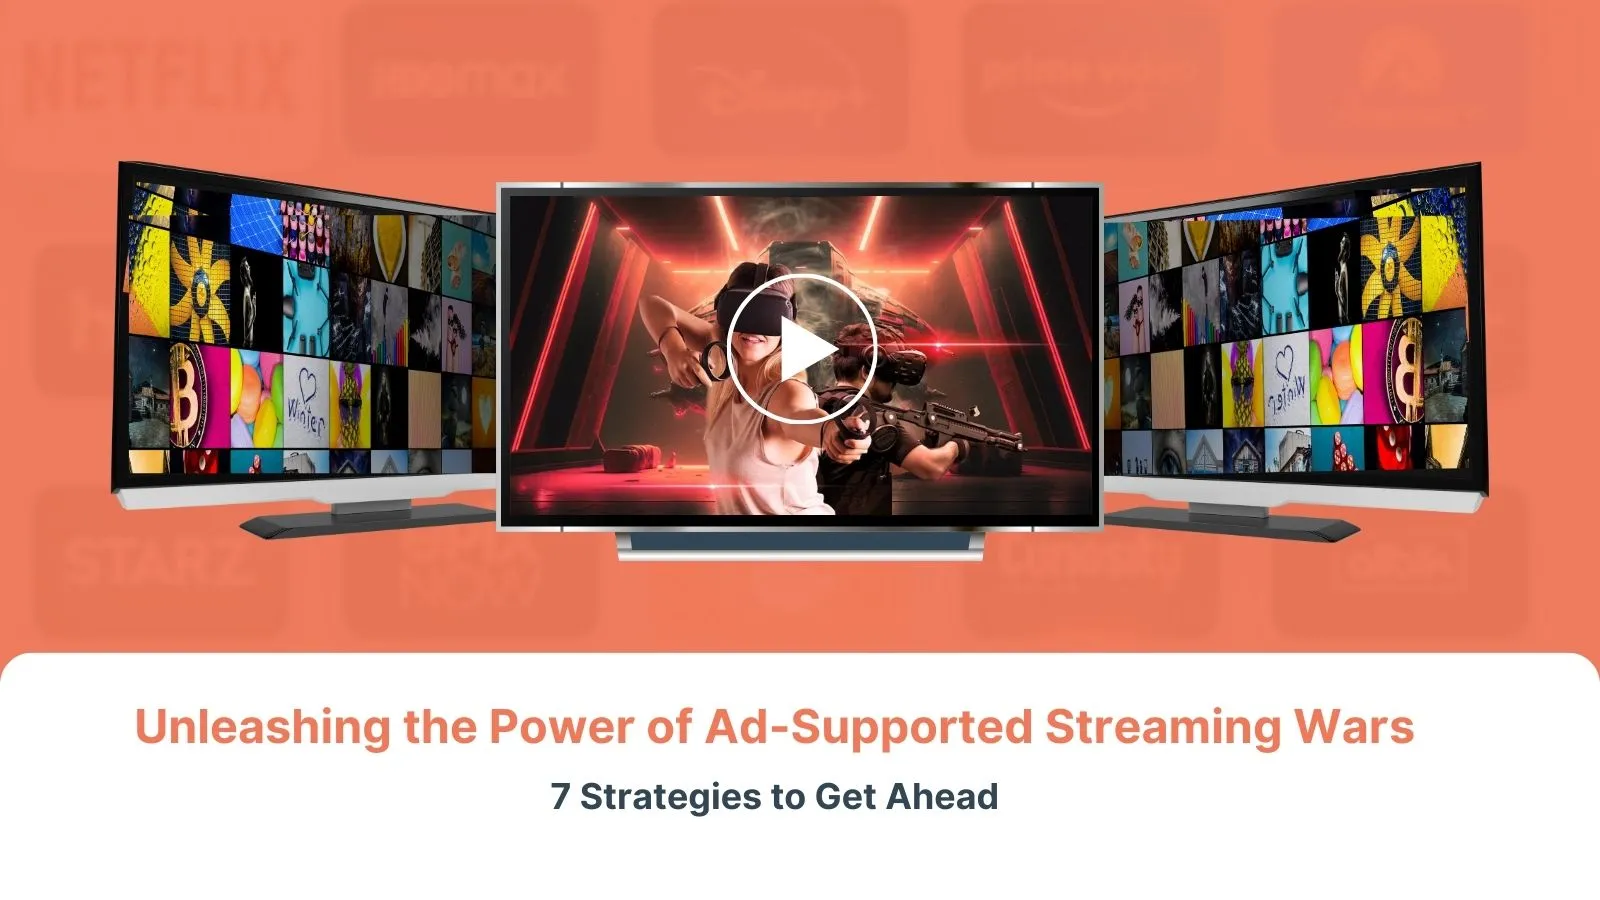 Unleashing the power of Ad- supported wars